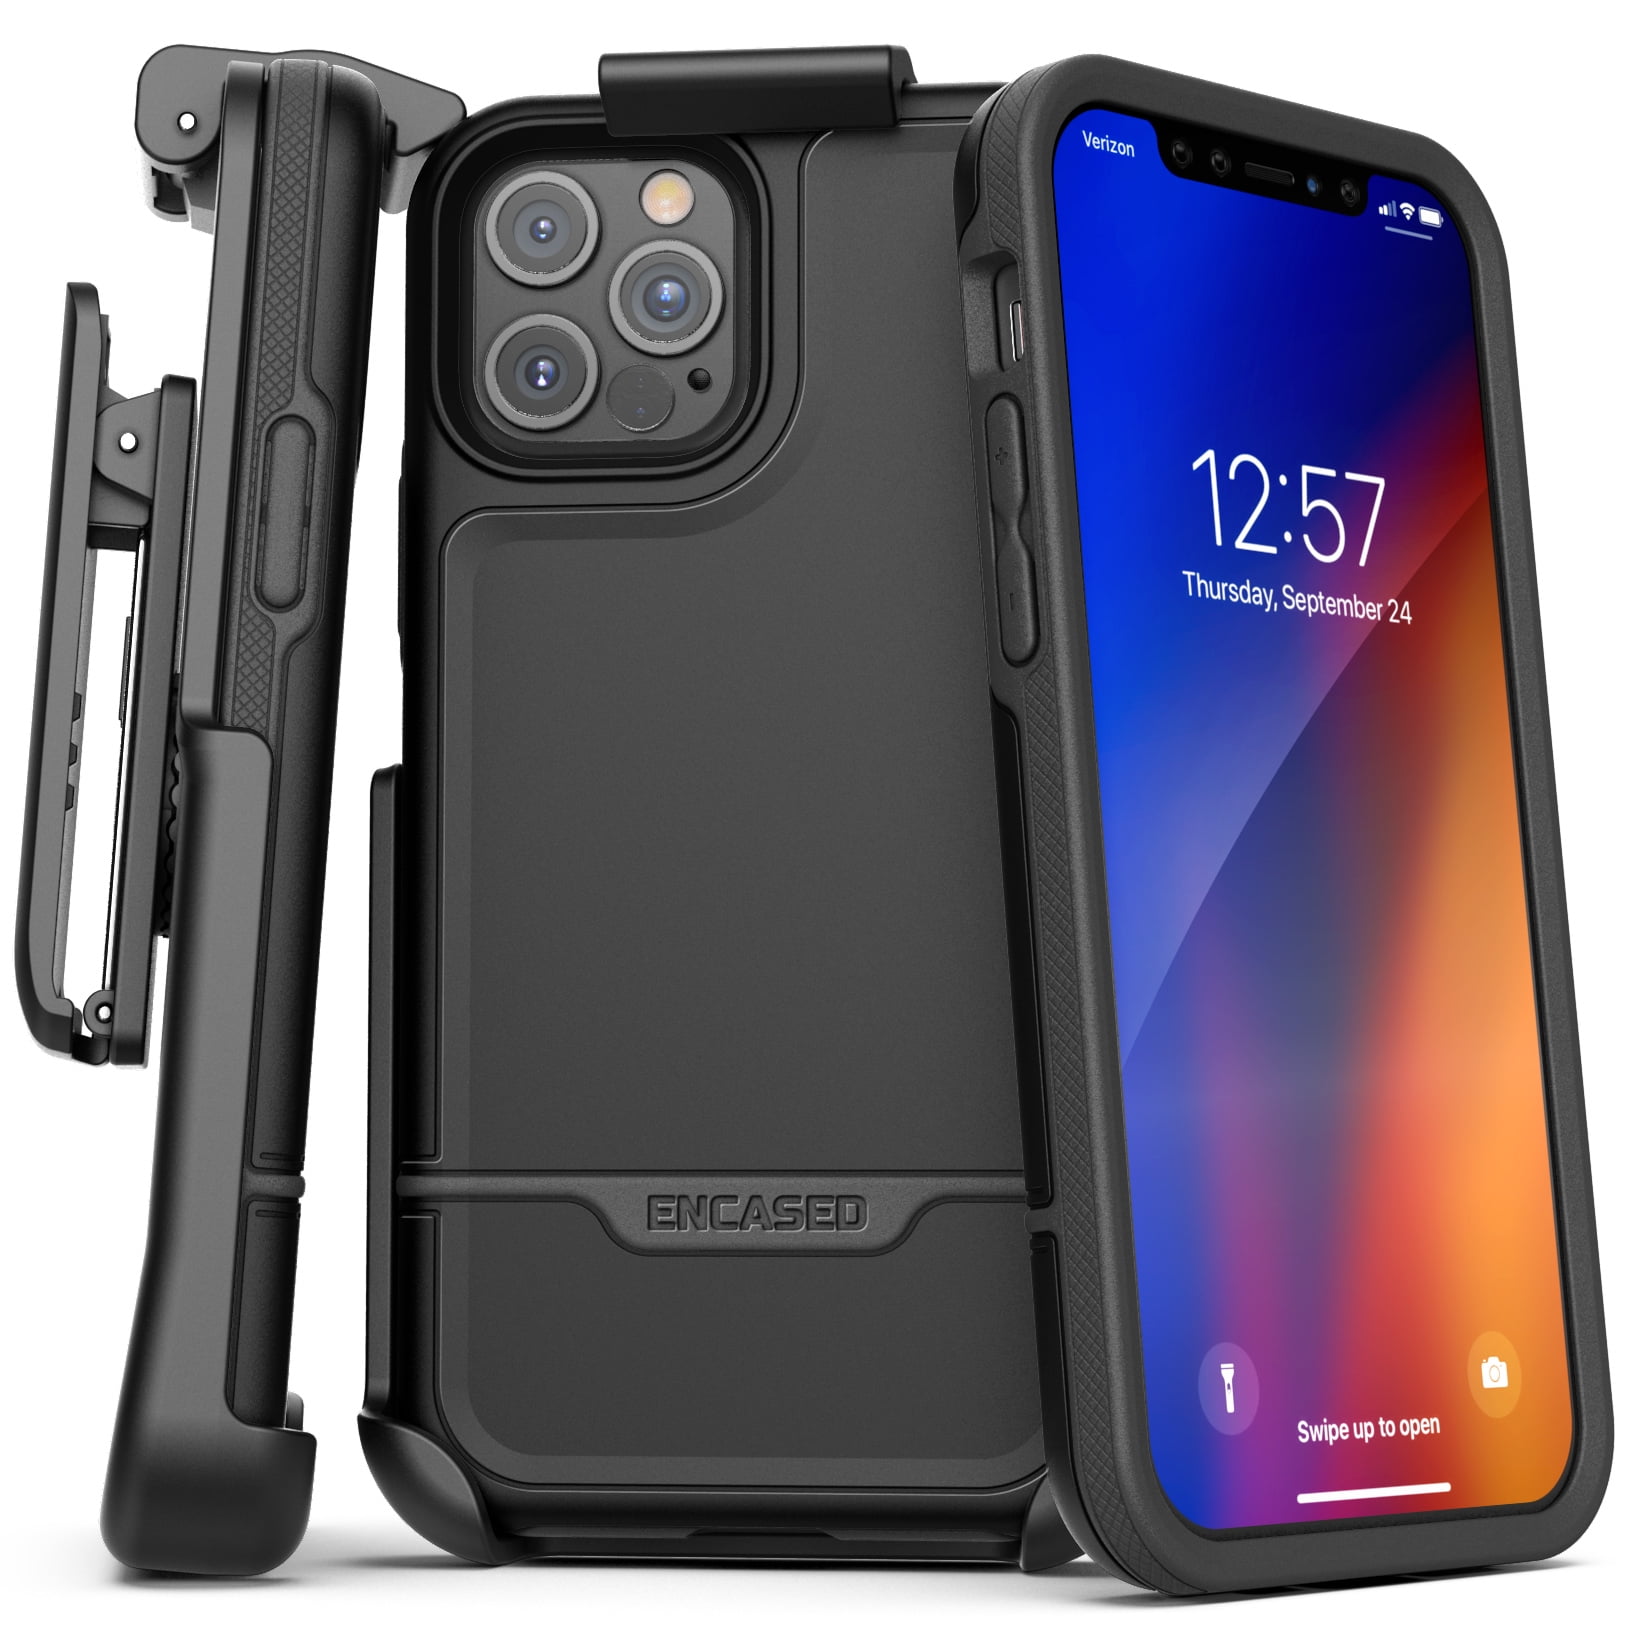 Slim Full Protection Heavy Duty Hybrid Case & Rotating Belt Clip Holster w/Built in Kickstand for iPhone 12 iPhone 12 Pro 6.1 BELTRON Case with Belt Clip for iPhone 12 iPhone 12 Pro Gunmetal Grey